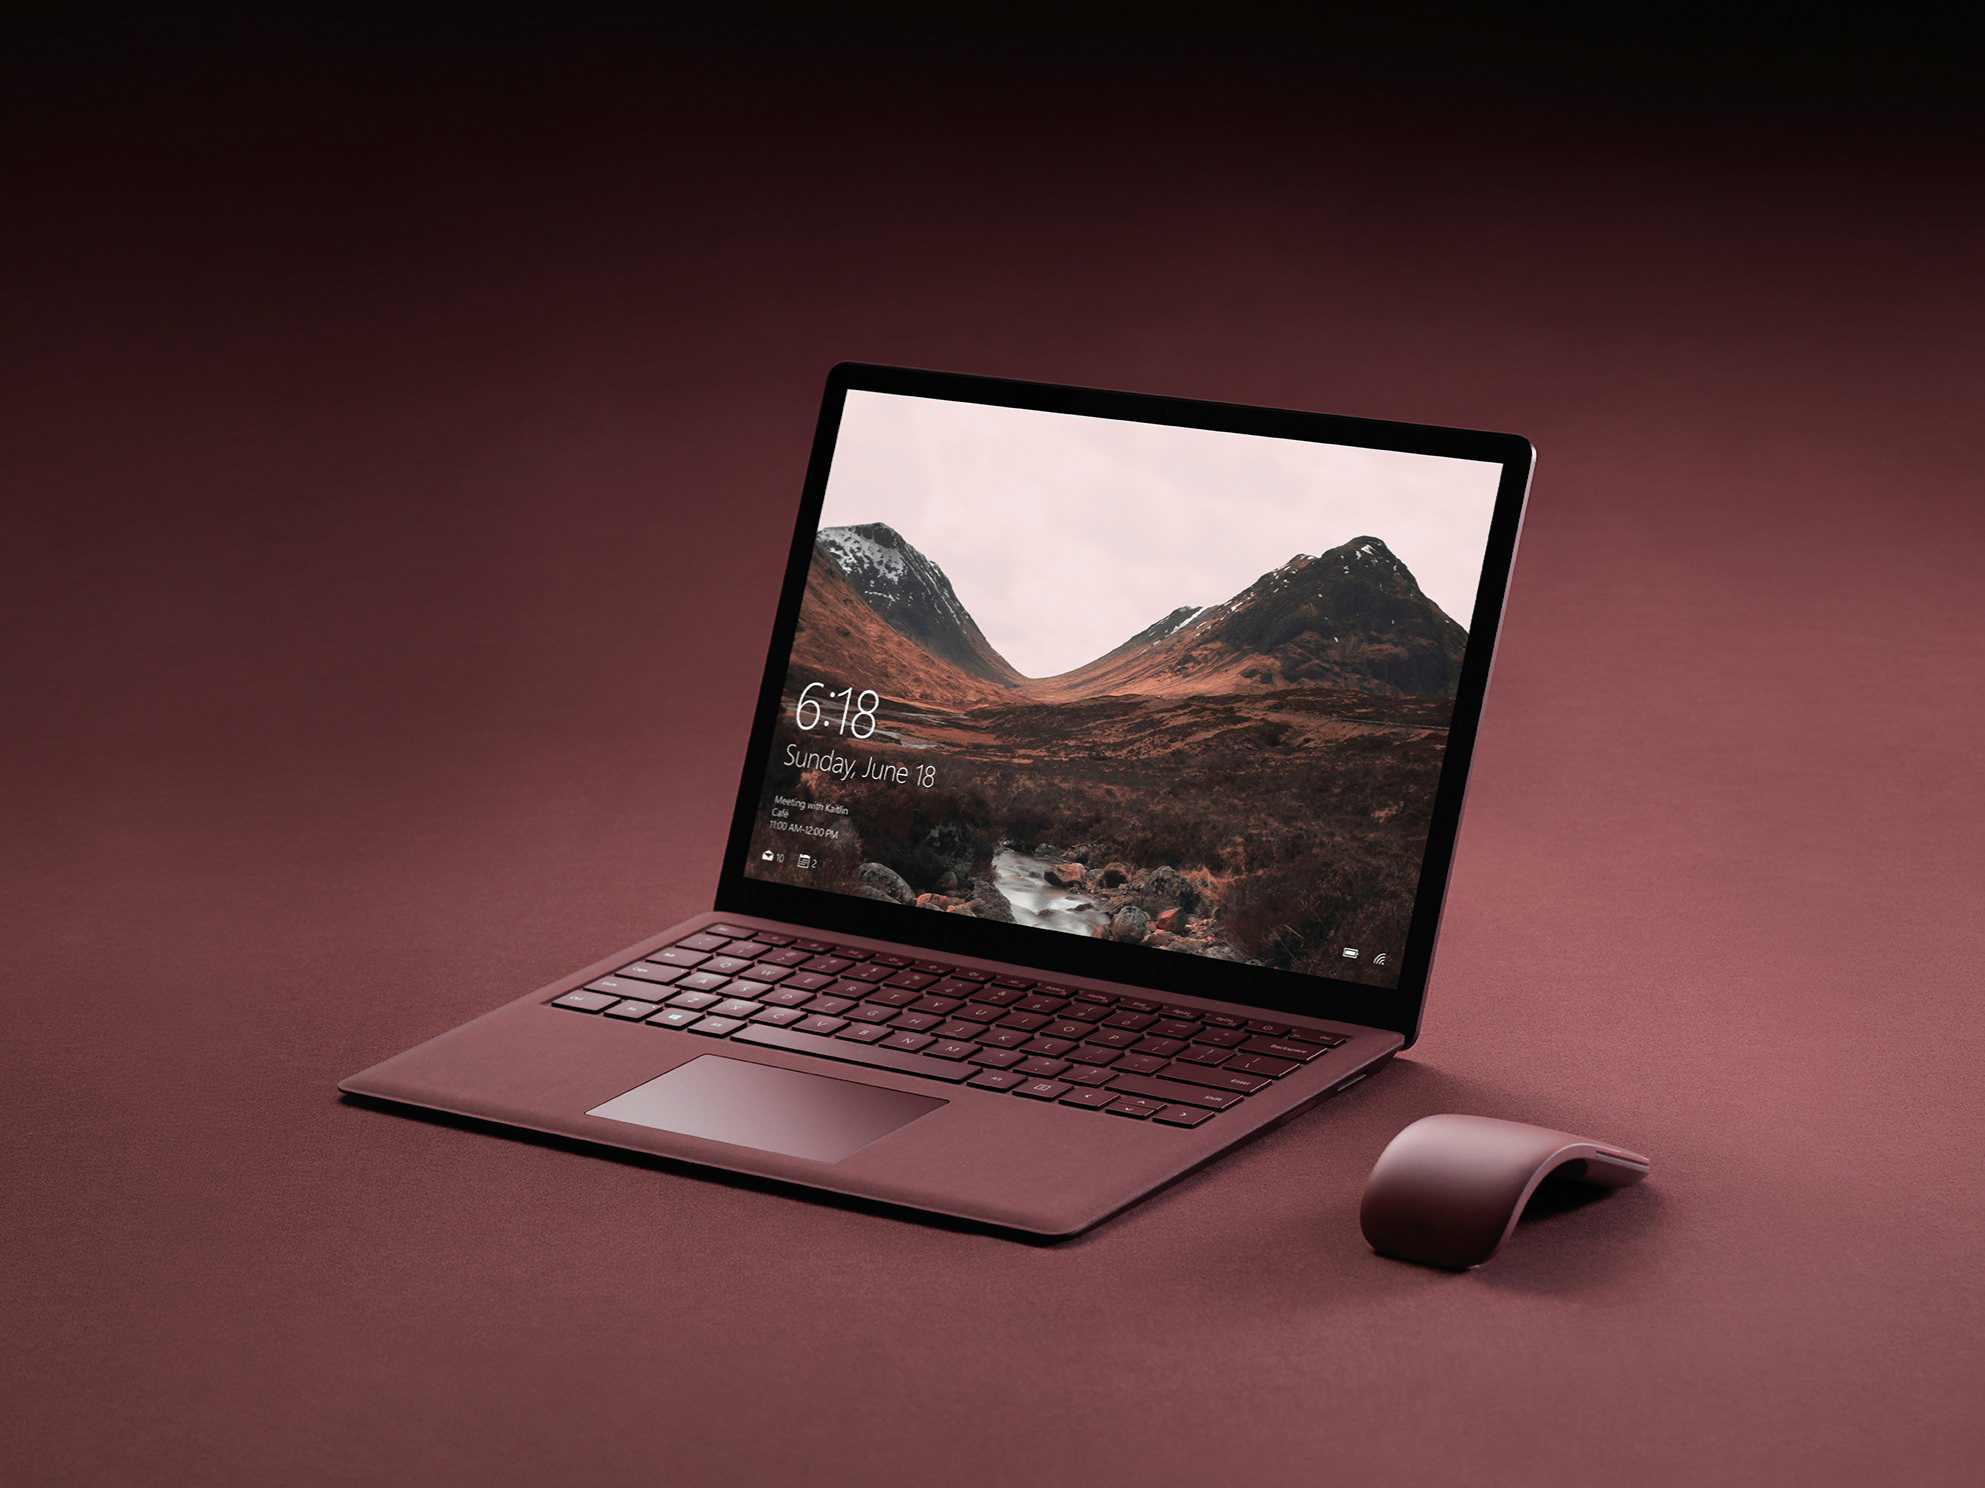 New Surface Laptop images and details leaked ahead of launch